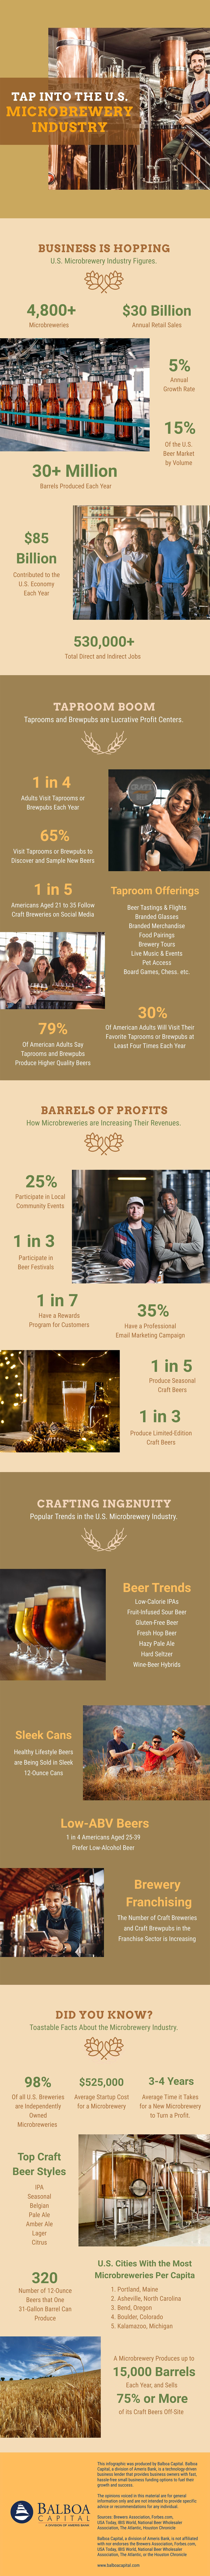 U.S. Microbrewery Industry Infographic